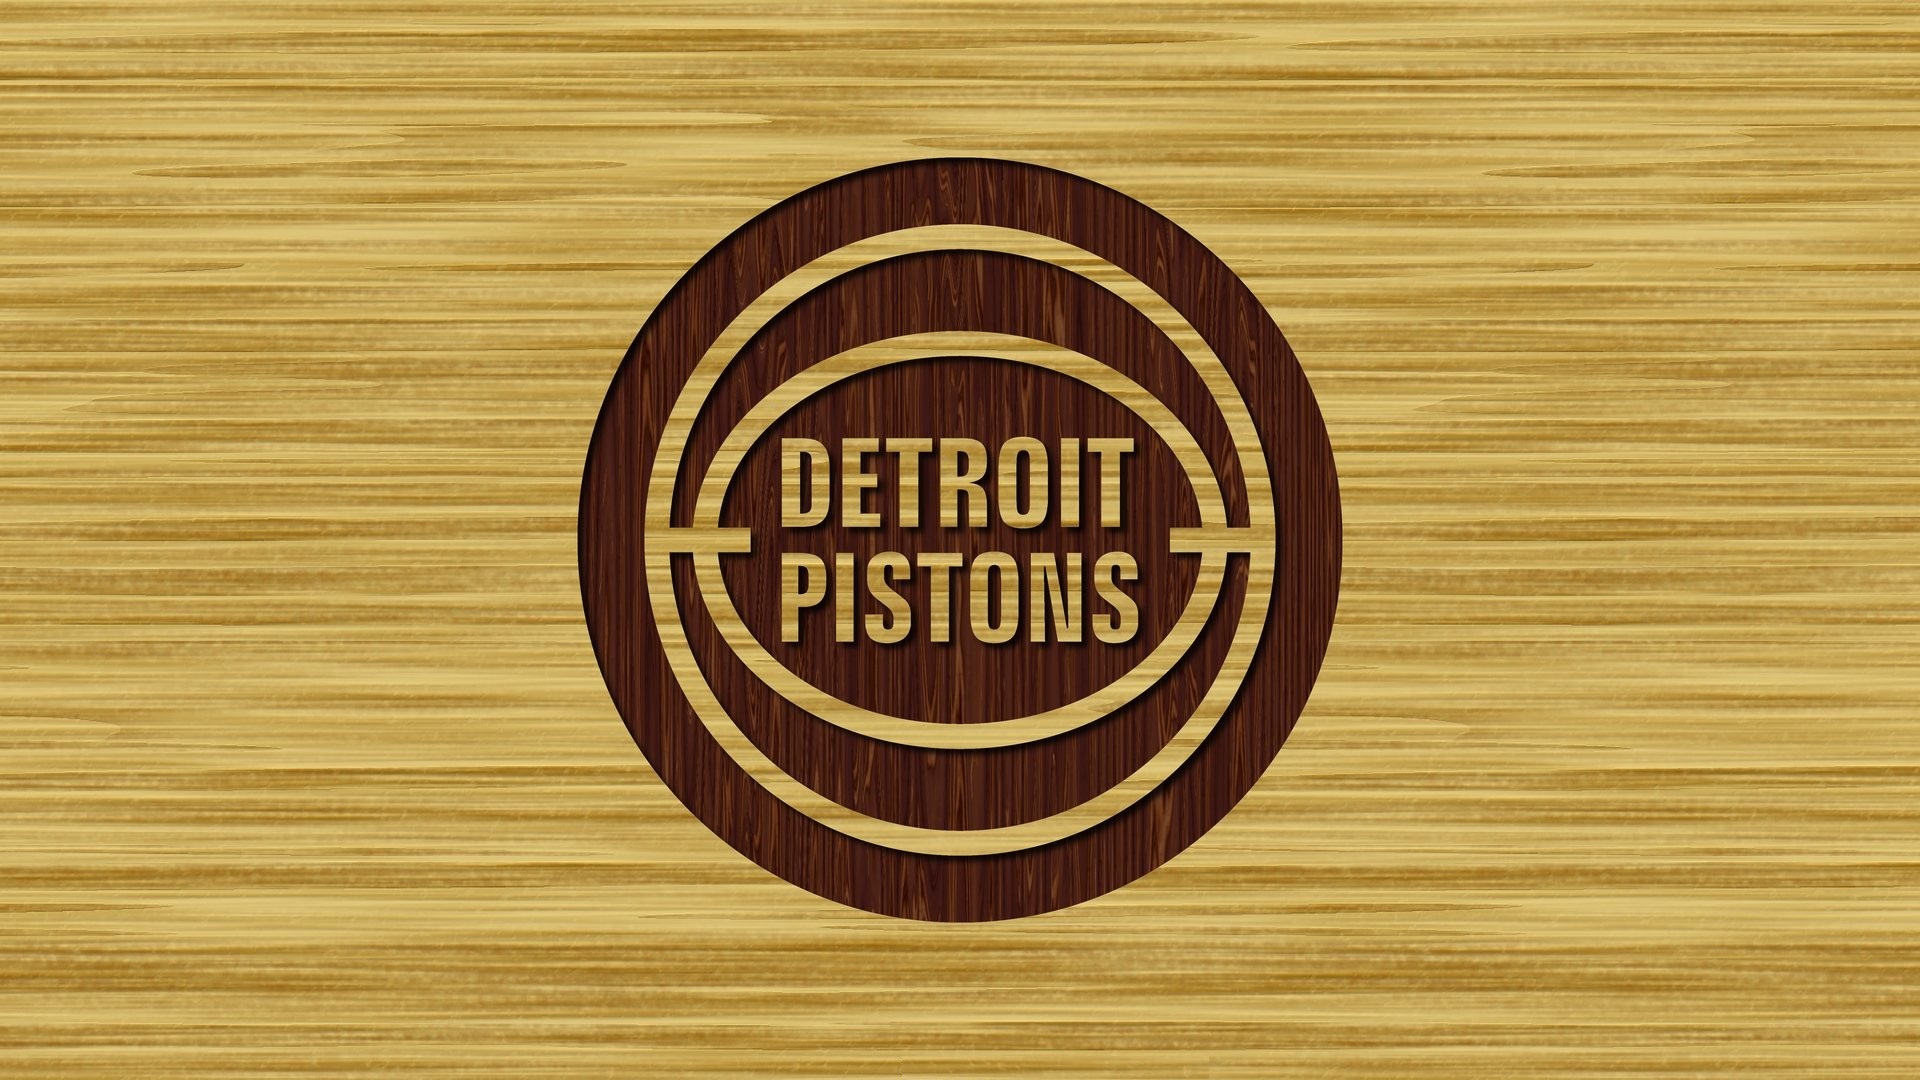 Detroit Pistons Logo Wallpaper HD with high-resolution 1920x1080 pixel. You can use this wallpaper for your Desktop Computer Backgrounds, Windows or Mac Screensavers, iPhone Lock screen, Tablet or Android and another Mobile Phone device